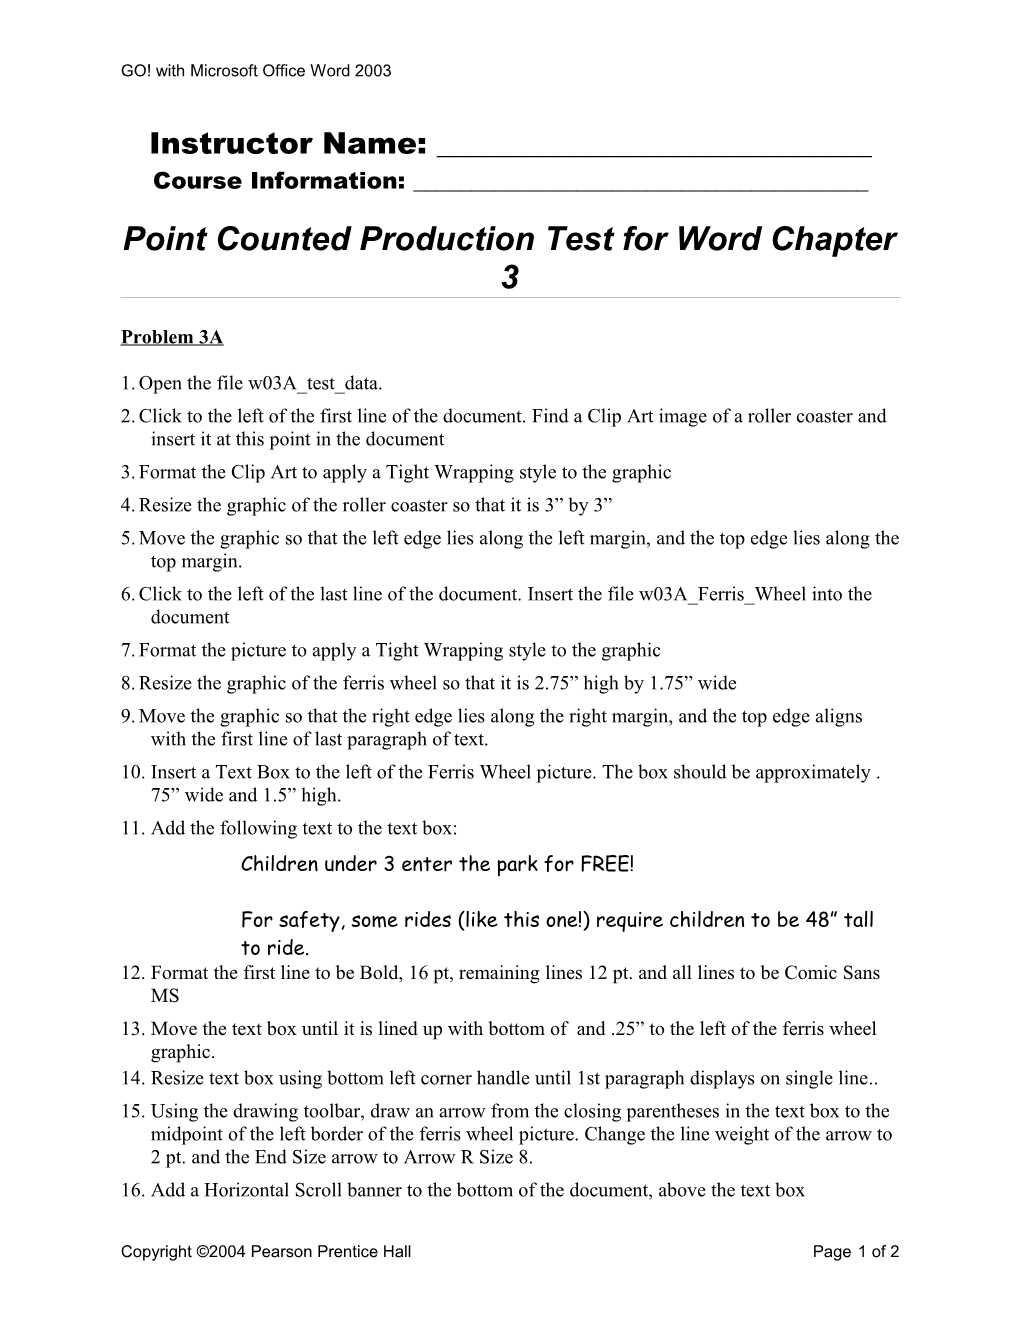 Word Chapter 3A PCPT